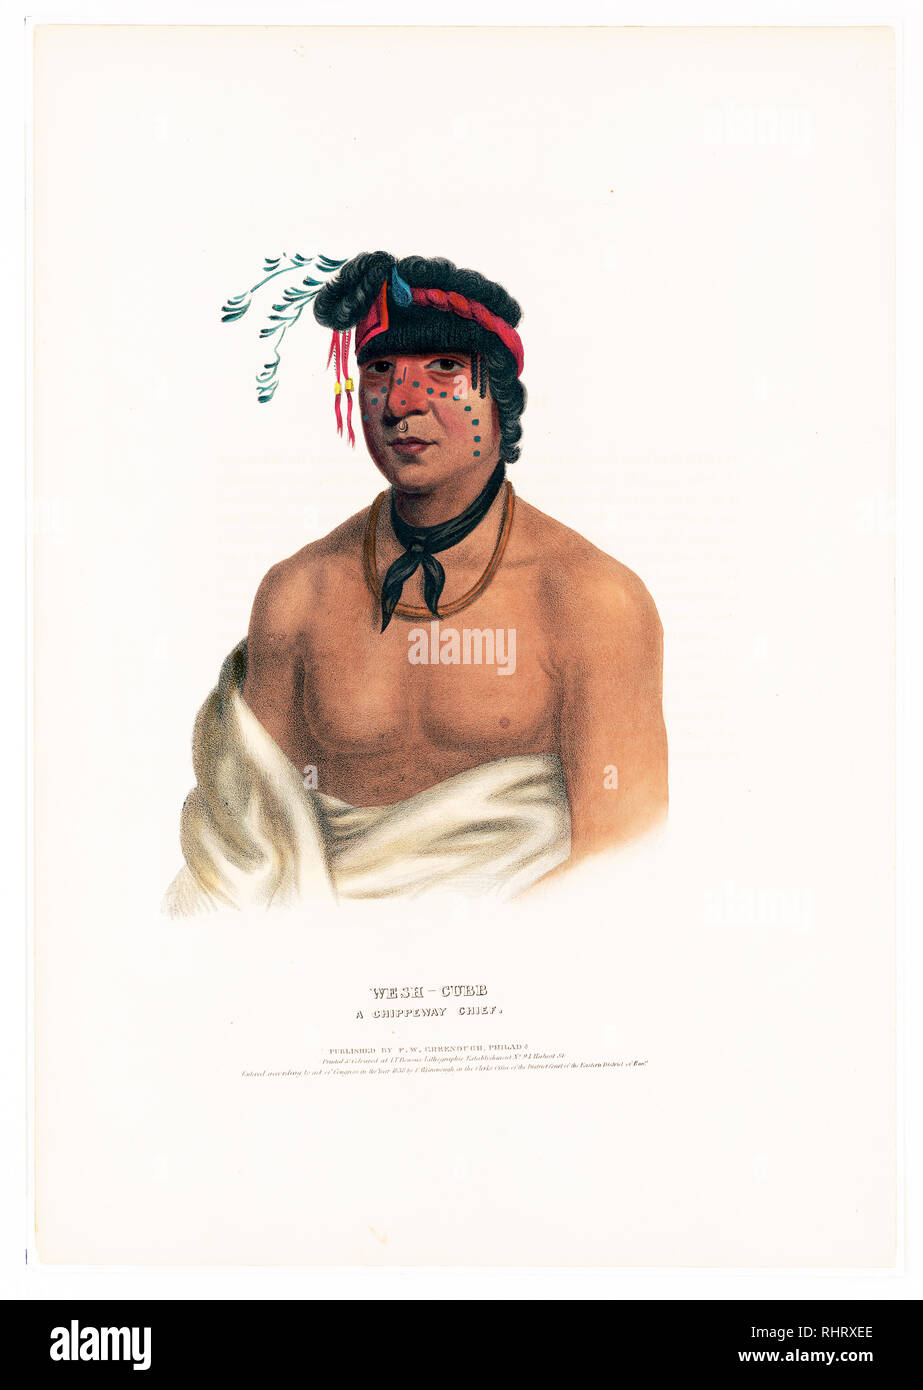 Print shows Wesh-Cubb, a Chippeway chief, half-length portrait, facing front, wearing a twisted band around his hair, a necktie, and holding a blanket off his shoulders. Stock Photo